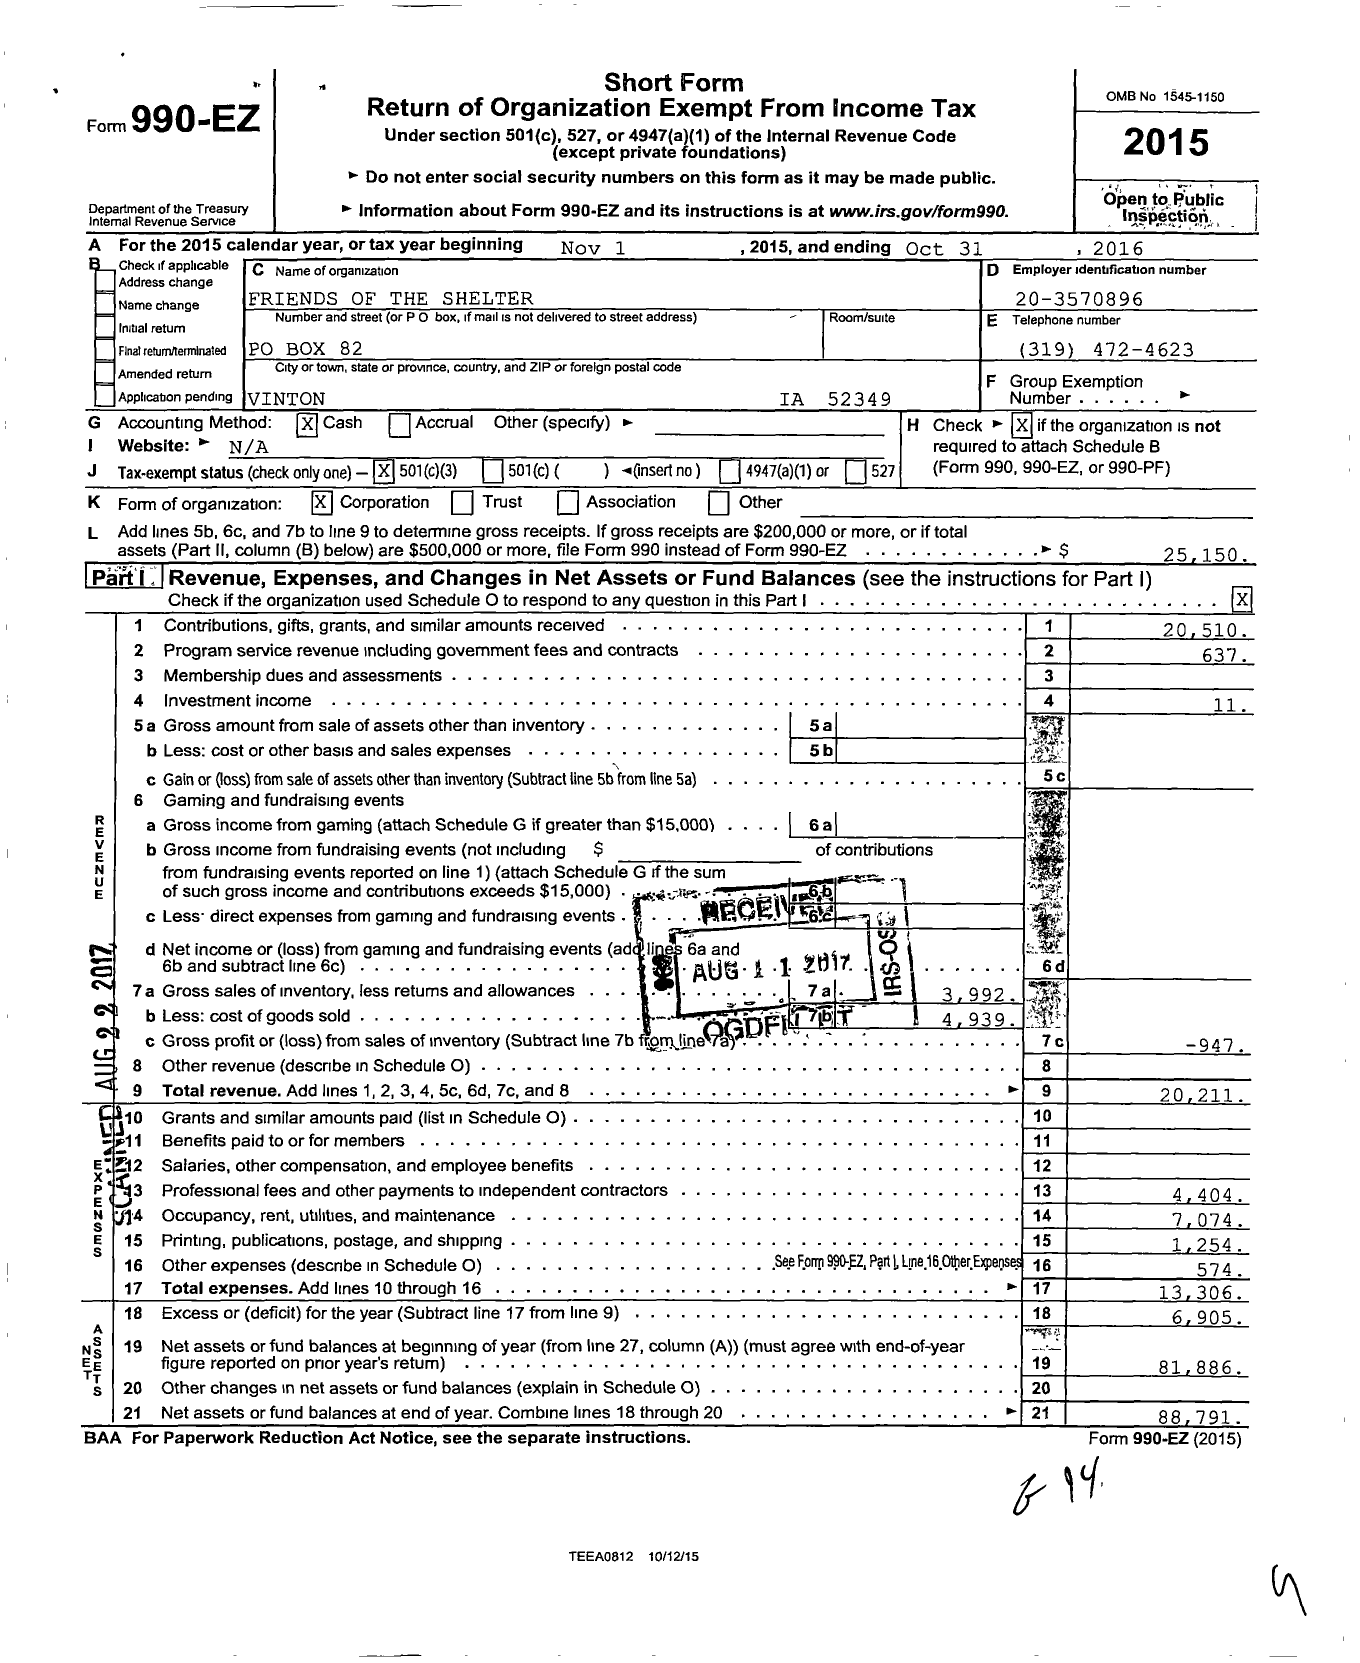 Image of first page of 2015 Form 990EZ for Friends of the Shelter